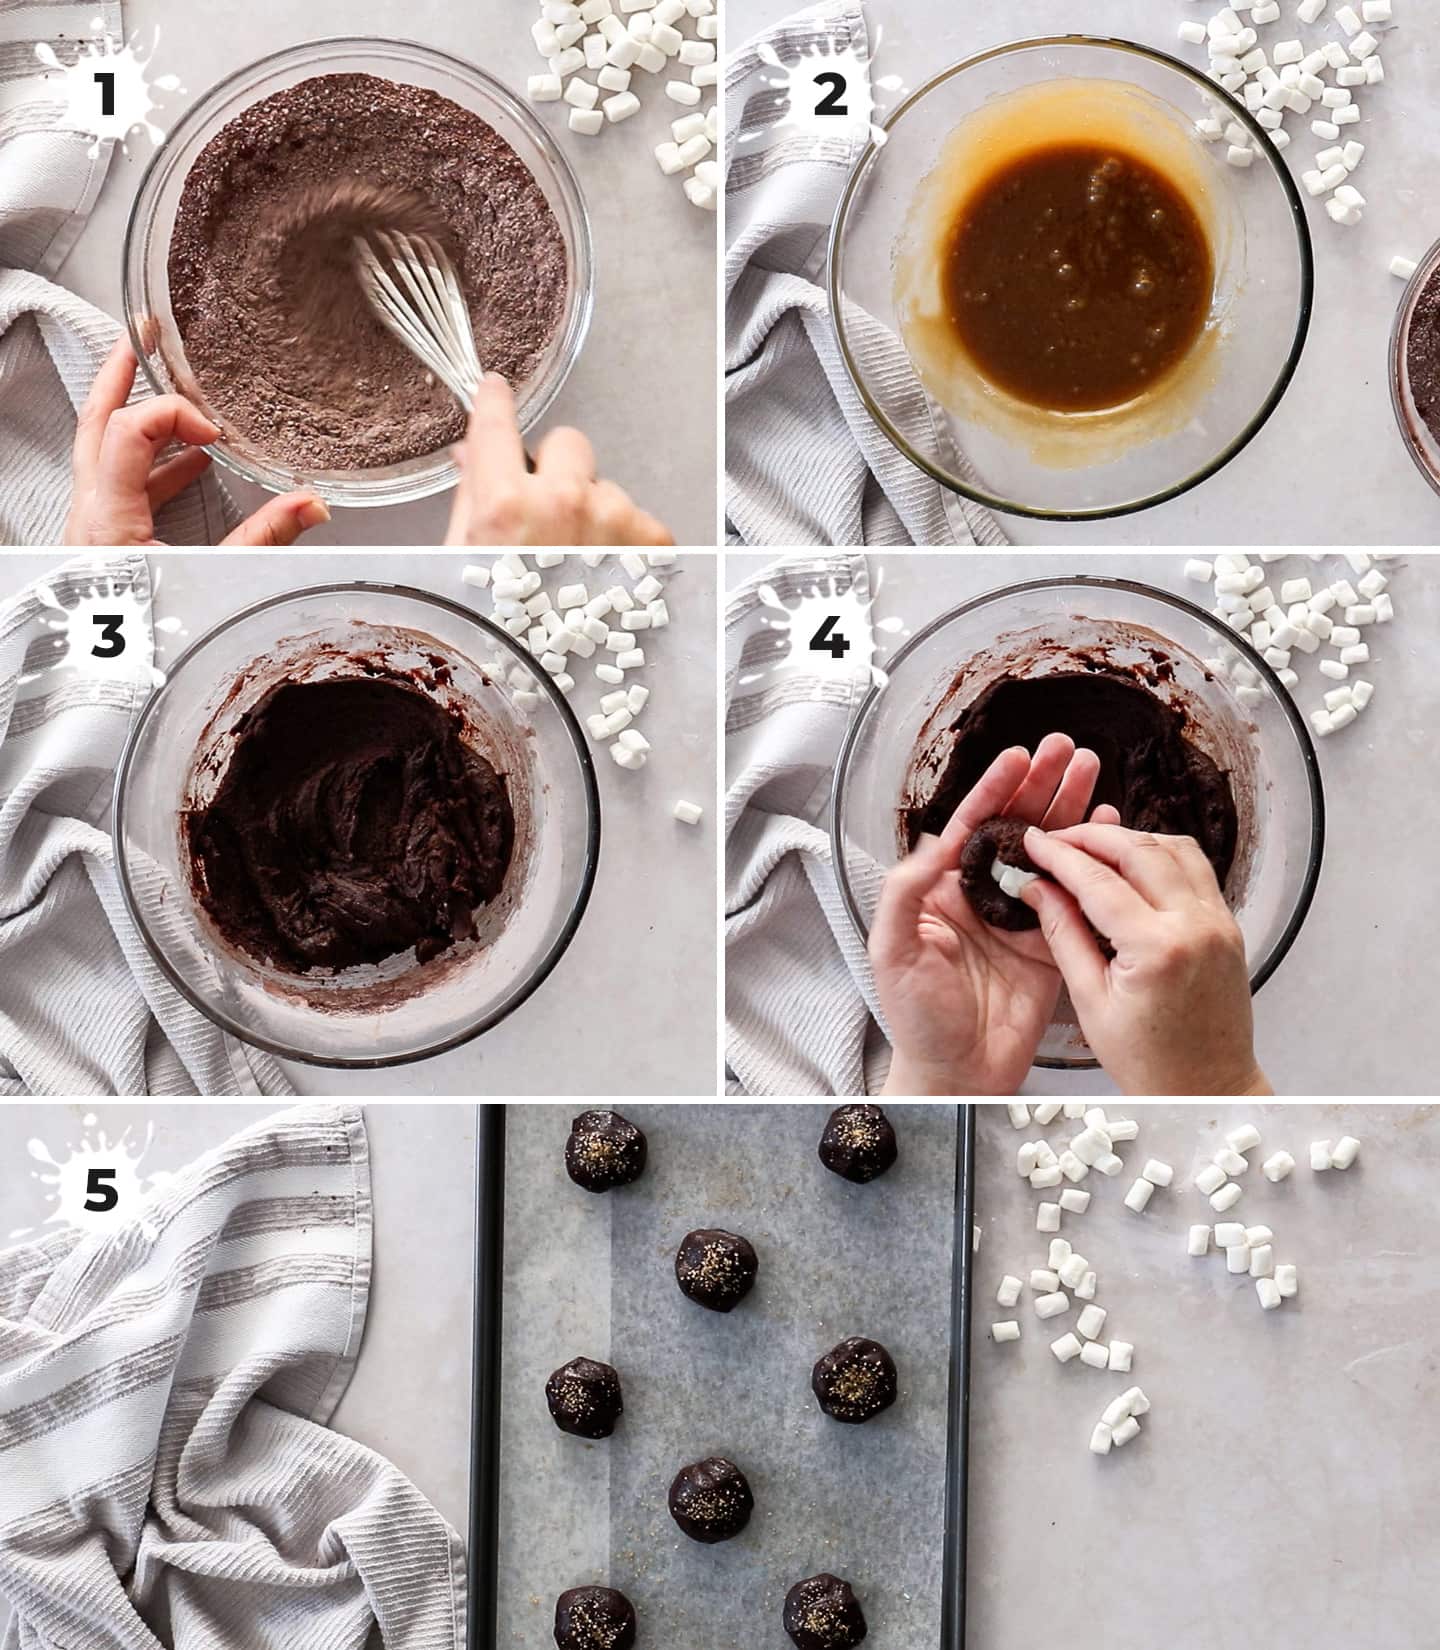 A collage of 5 images showing how to make chocolate marshmallow cookies.